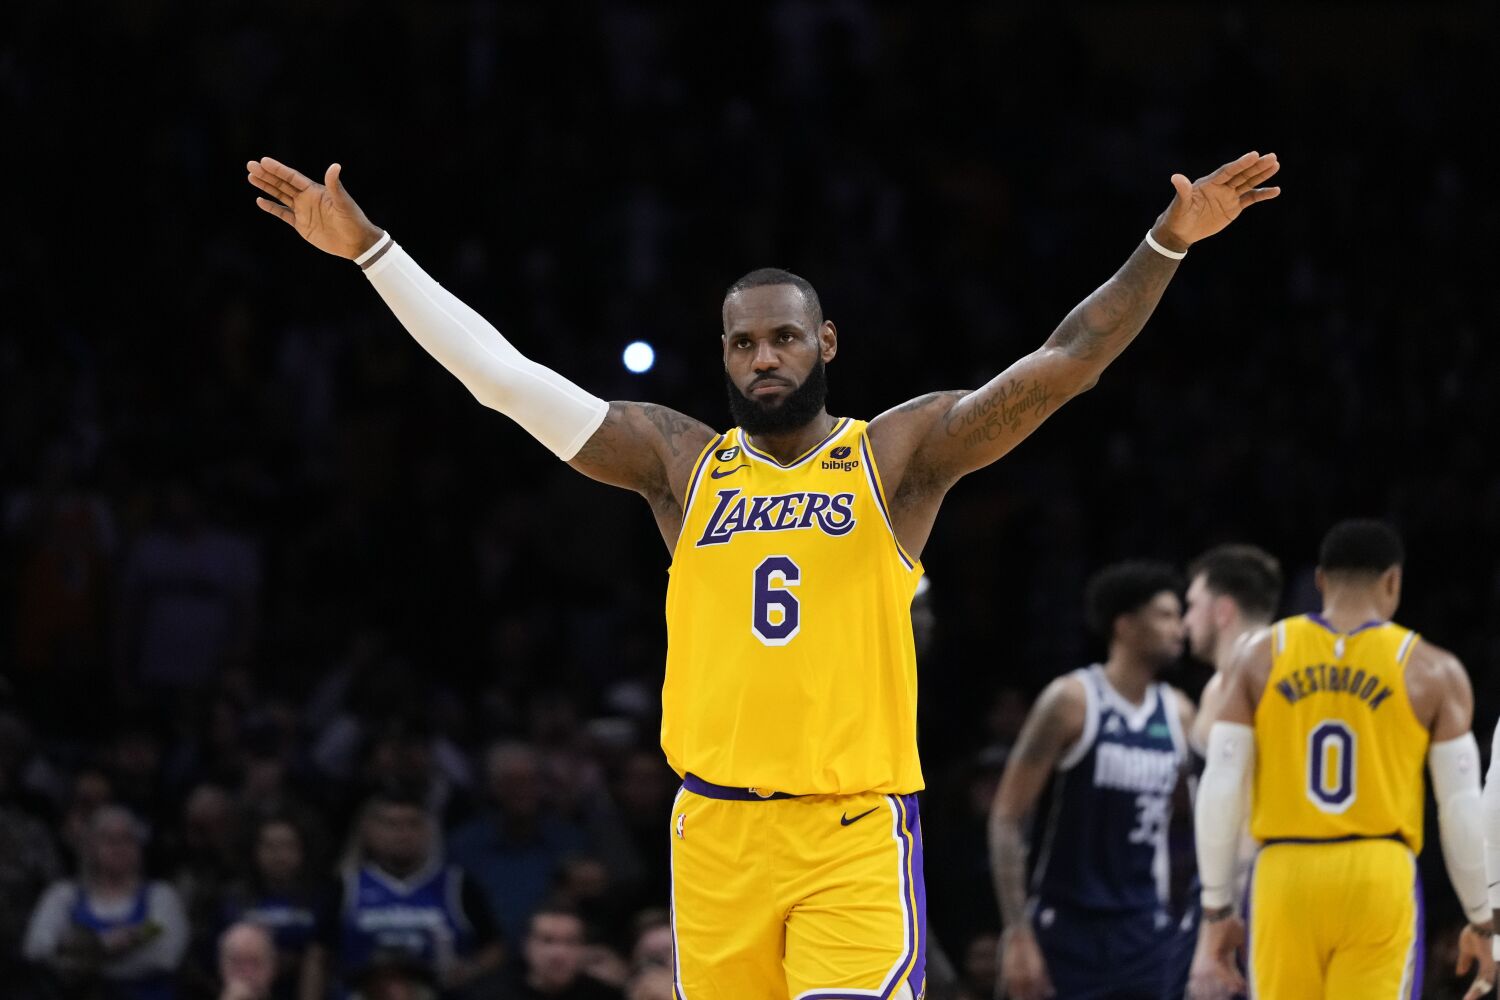 Column: LeBron James does his best to show restraint as frustrating Lakers season continues